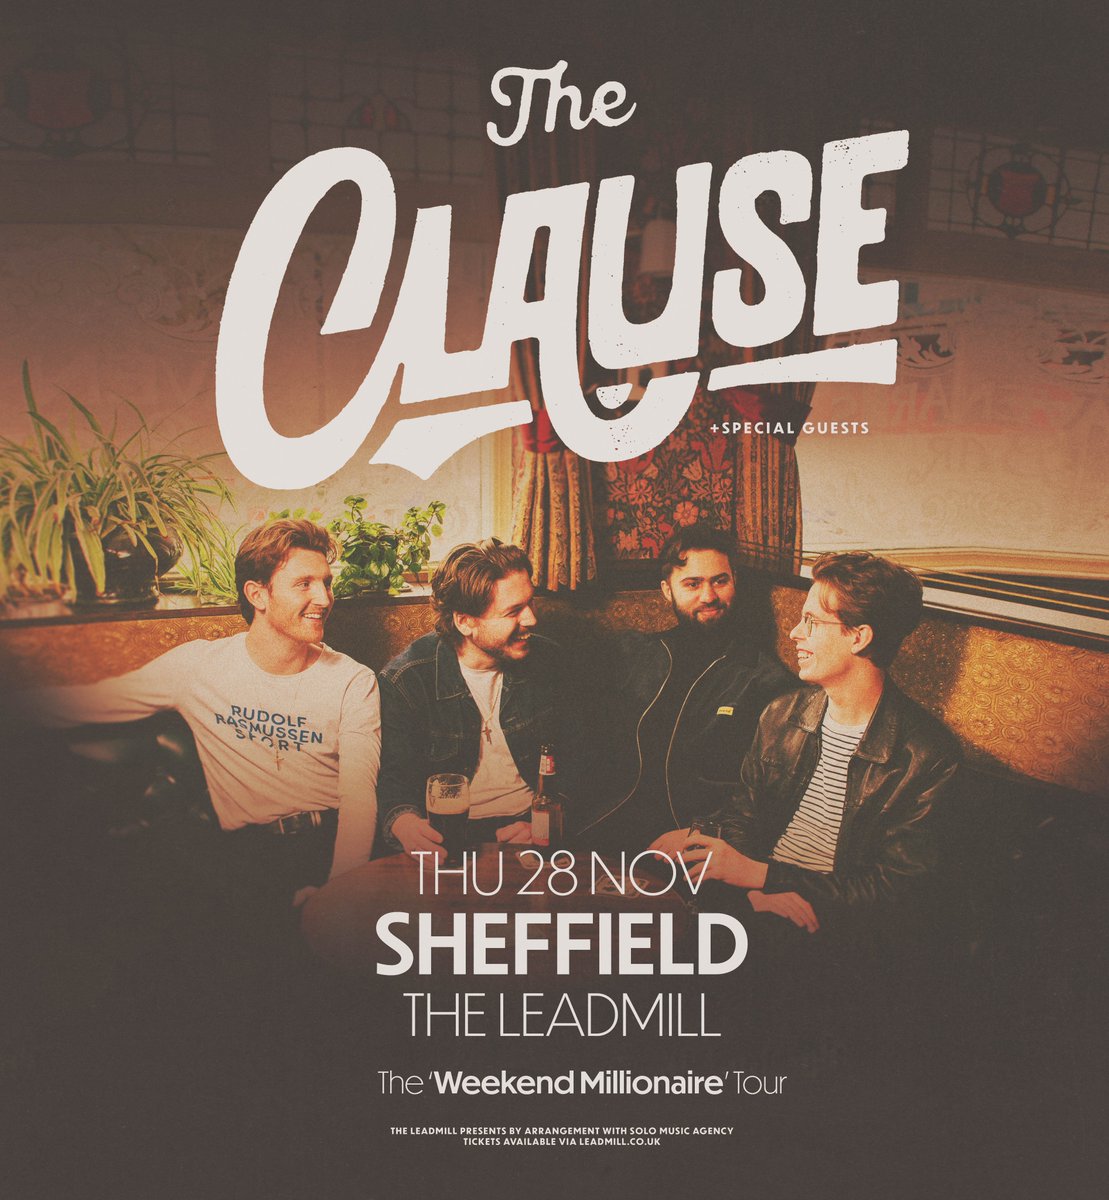 New Show Announcement - @theclauseuk 🚨 With more than enough tunes that deliver the halcyon indie-pop vibe of the late 00s, Birmingham quartet The Clause bring bangers to Sheffield this November 🎸 Tickets on sale this Friday at 10am from leadmill.co.uk/event/the-clau…